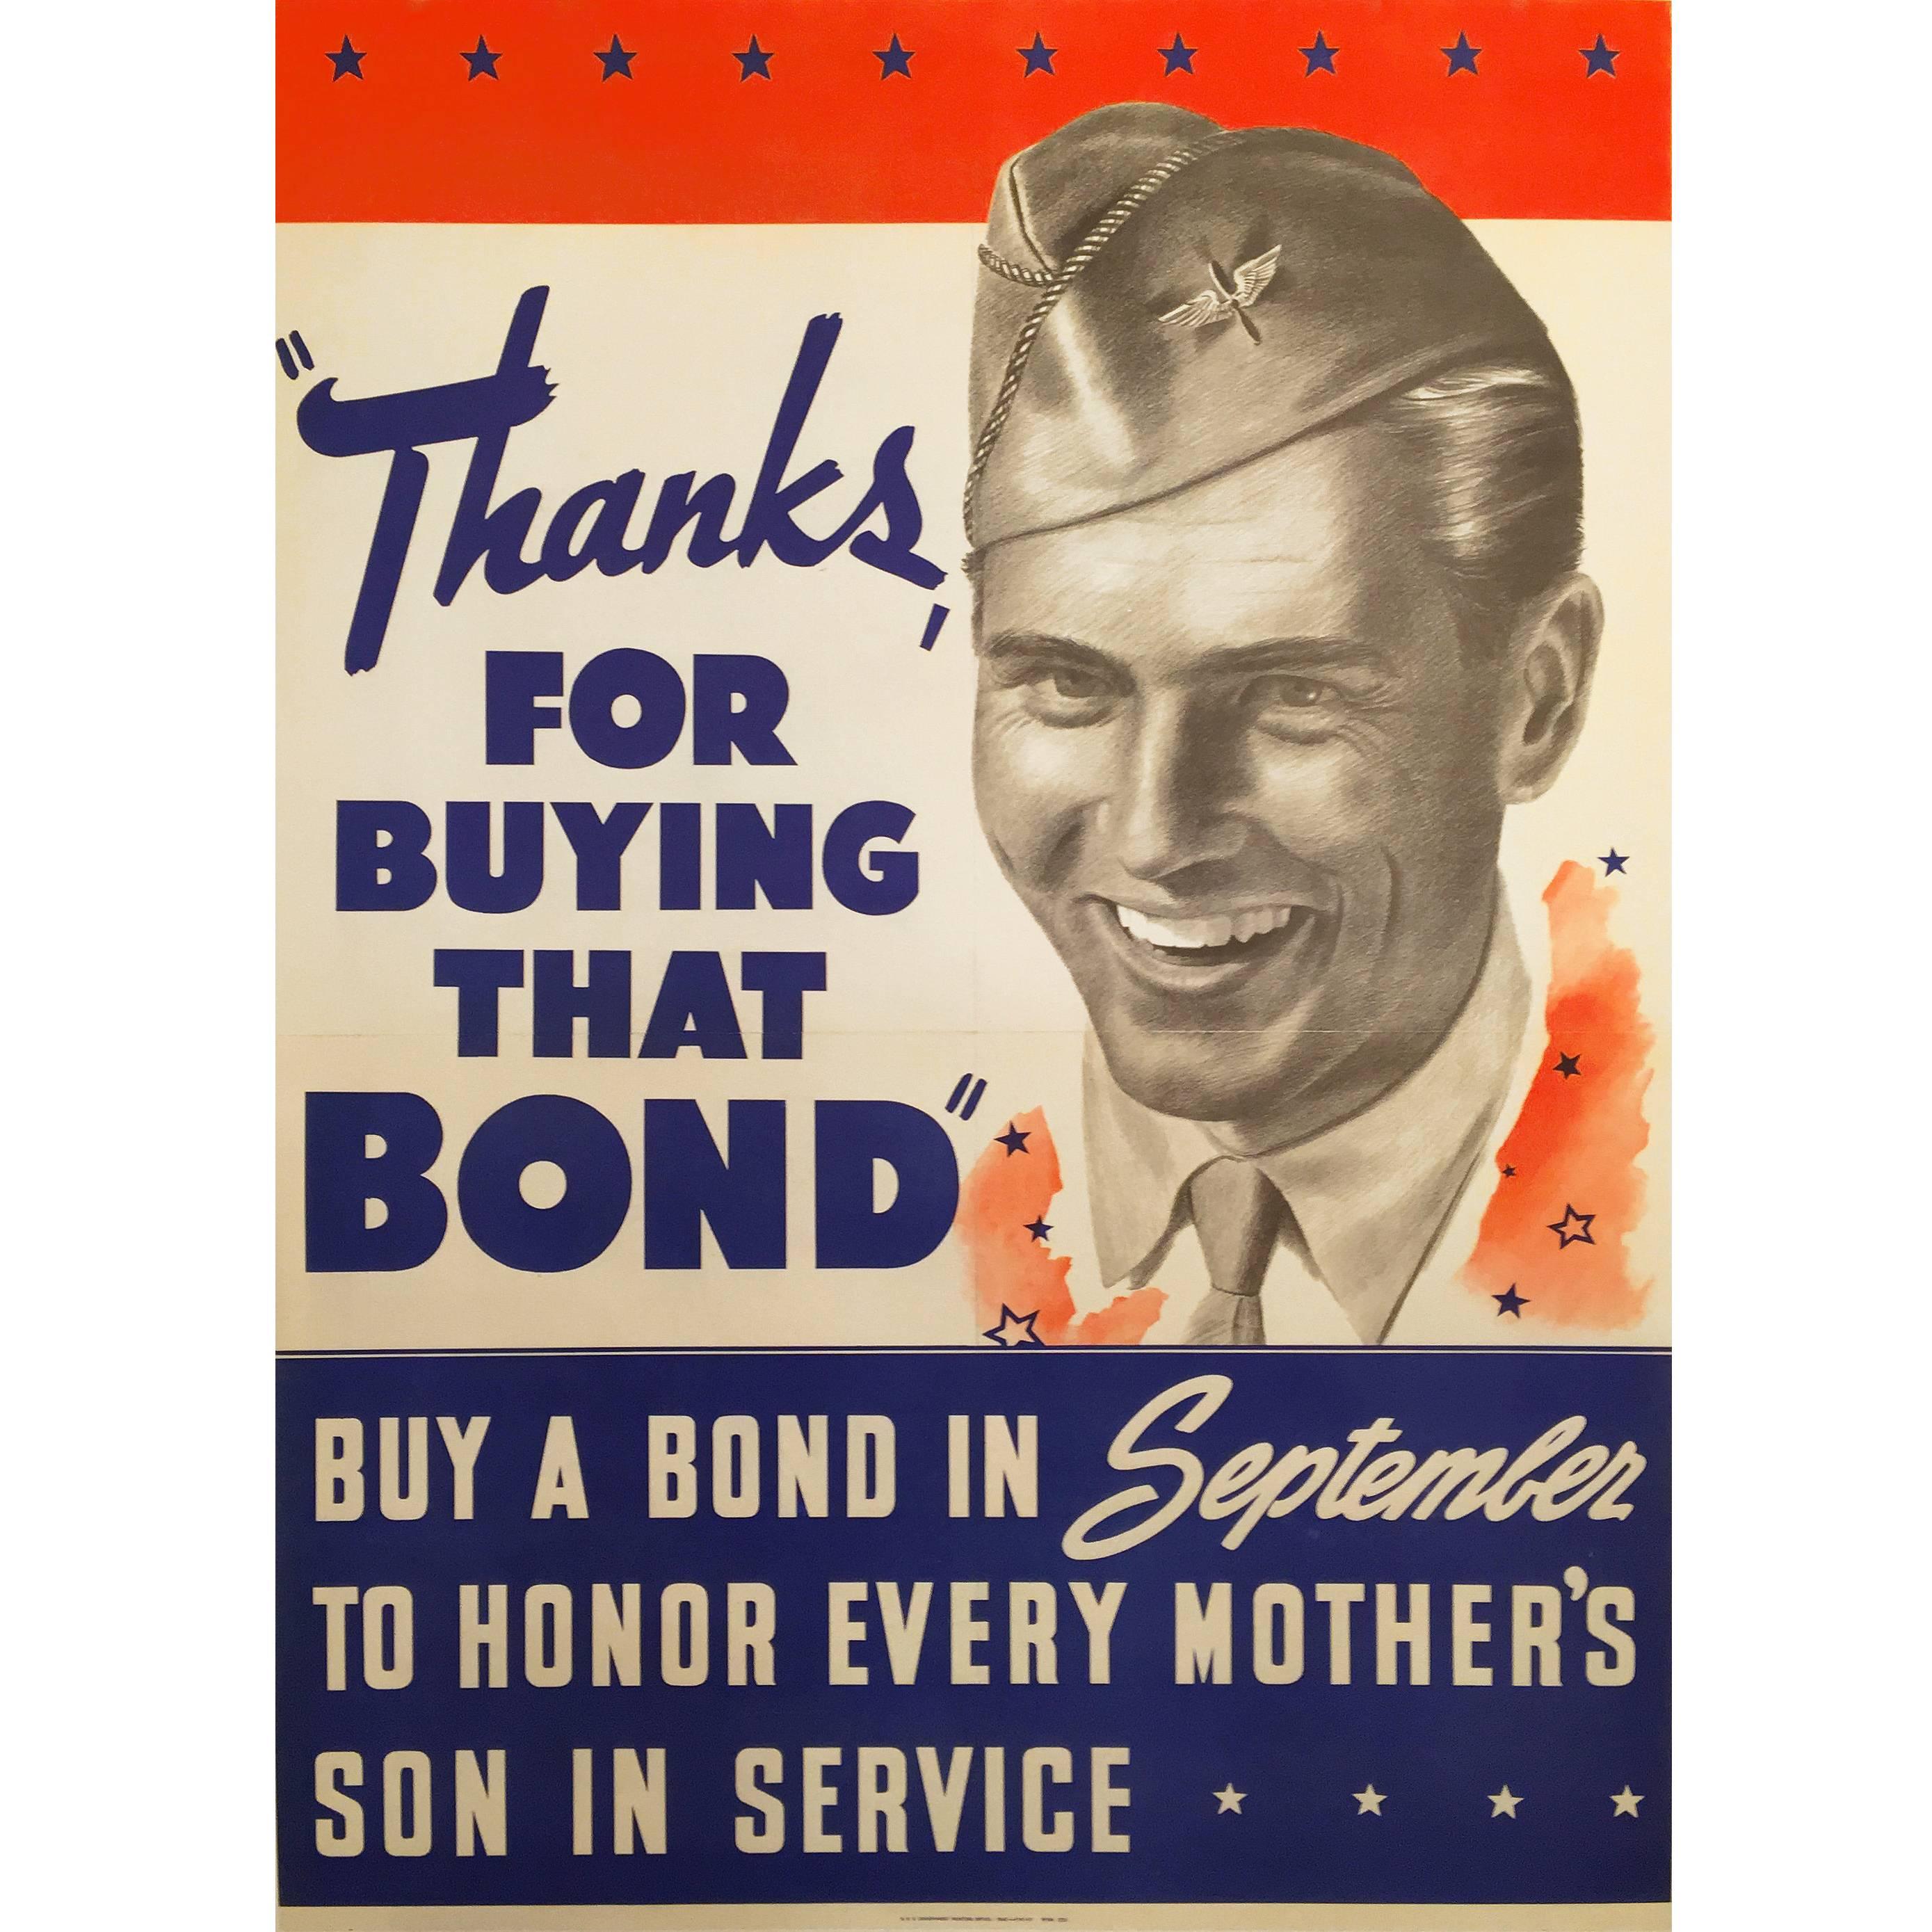 American Government Poster "Thanks for Buying That Bond" 1942 For Sale